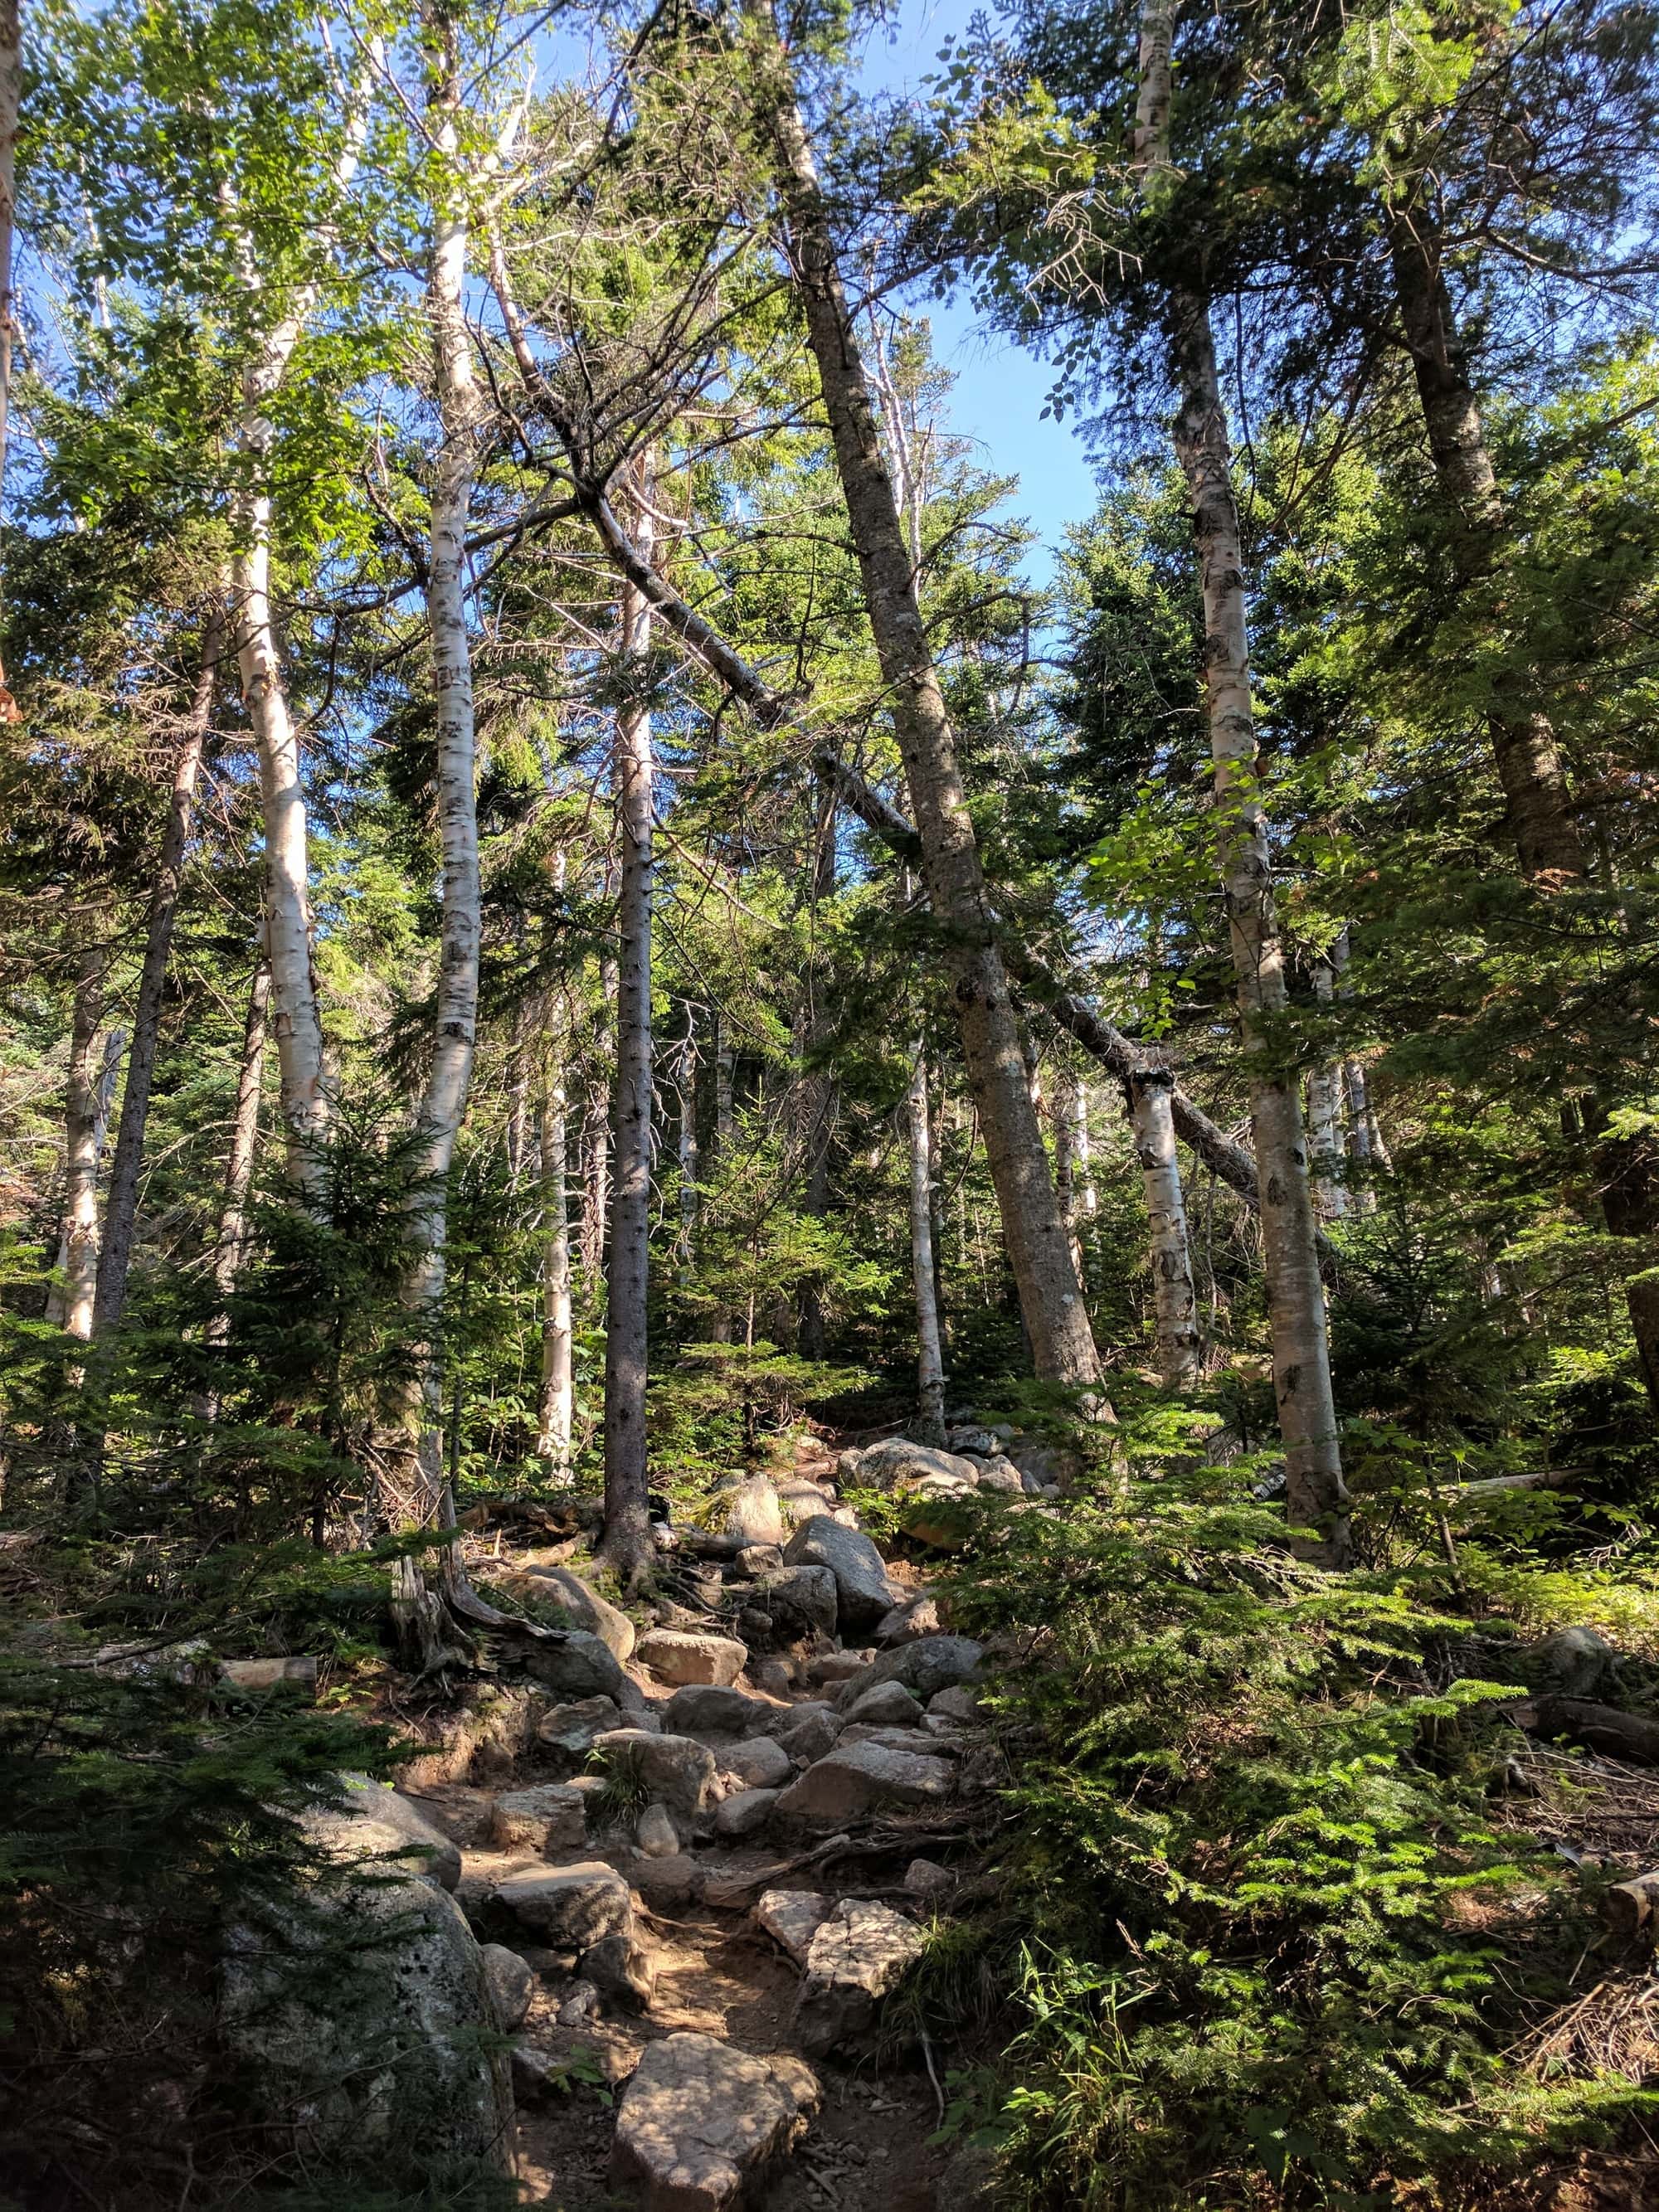 Check out our detailed trail guide to hiking New Hampshire's 8.5 mile Franconia Ridge Loop. We've included when to go, pros and cons of the different directions, and tips for success on this strenuous trek in the White Mountains.